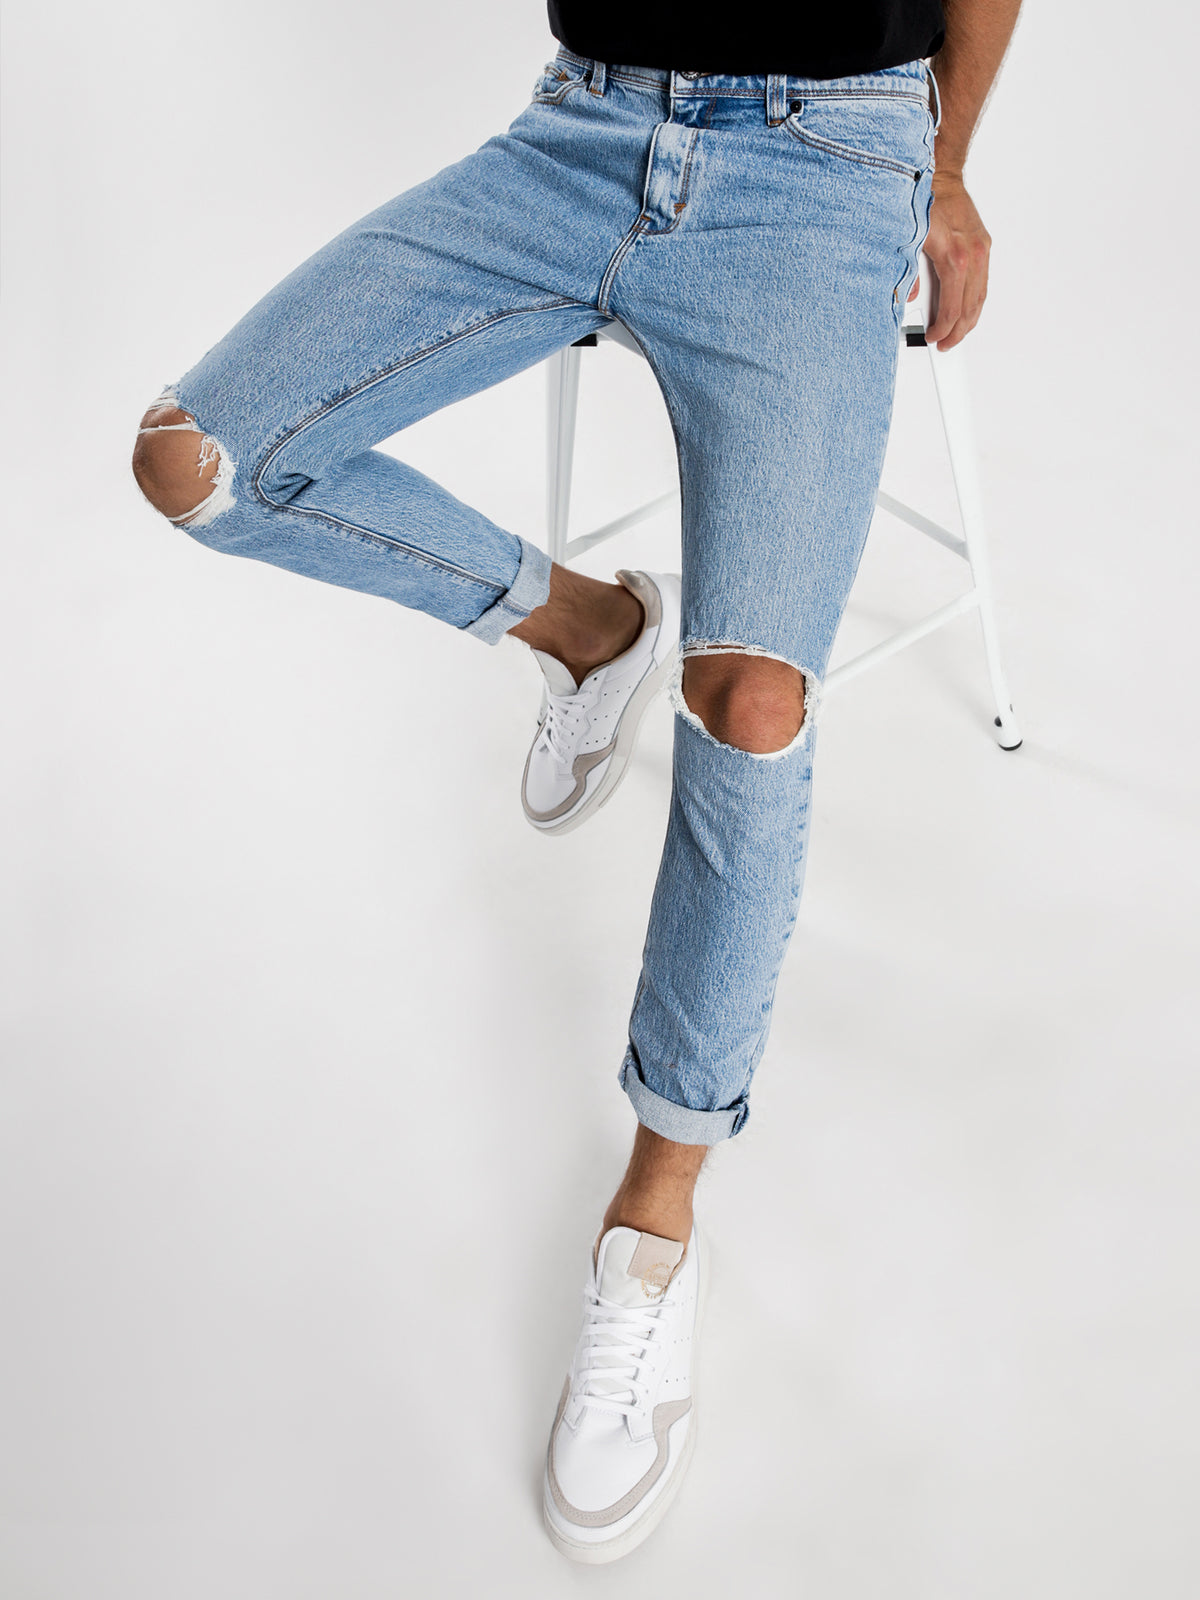 A Dropped Skinny Turn Up Jeans in Sketchy Blue Denim